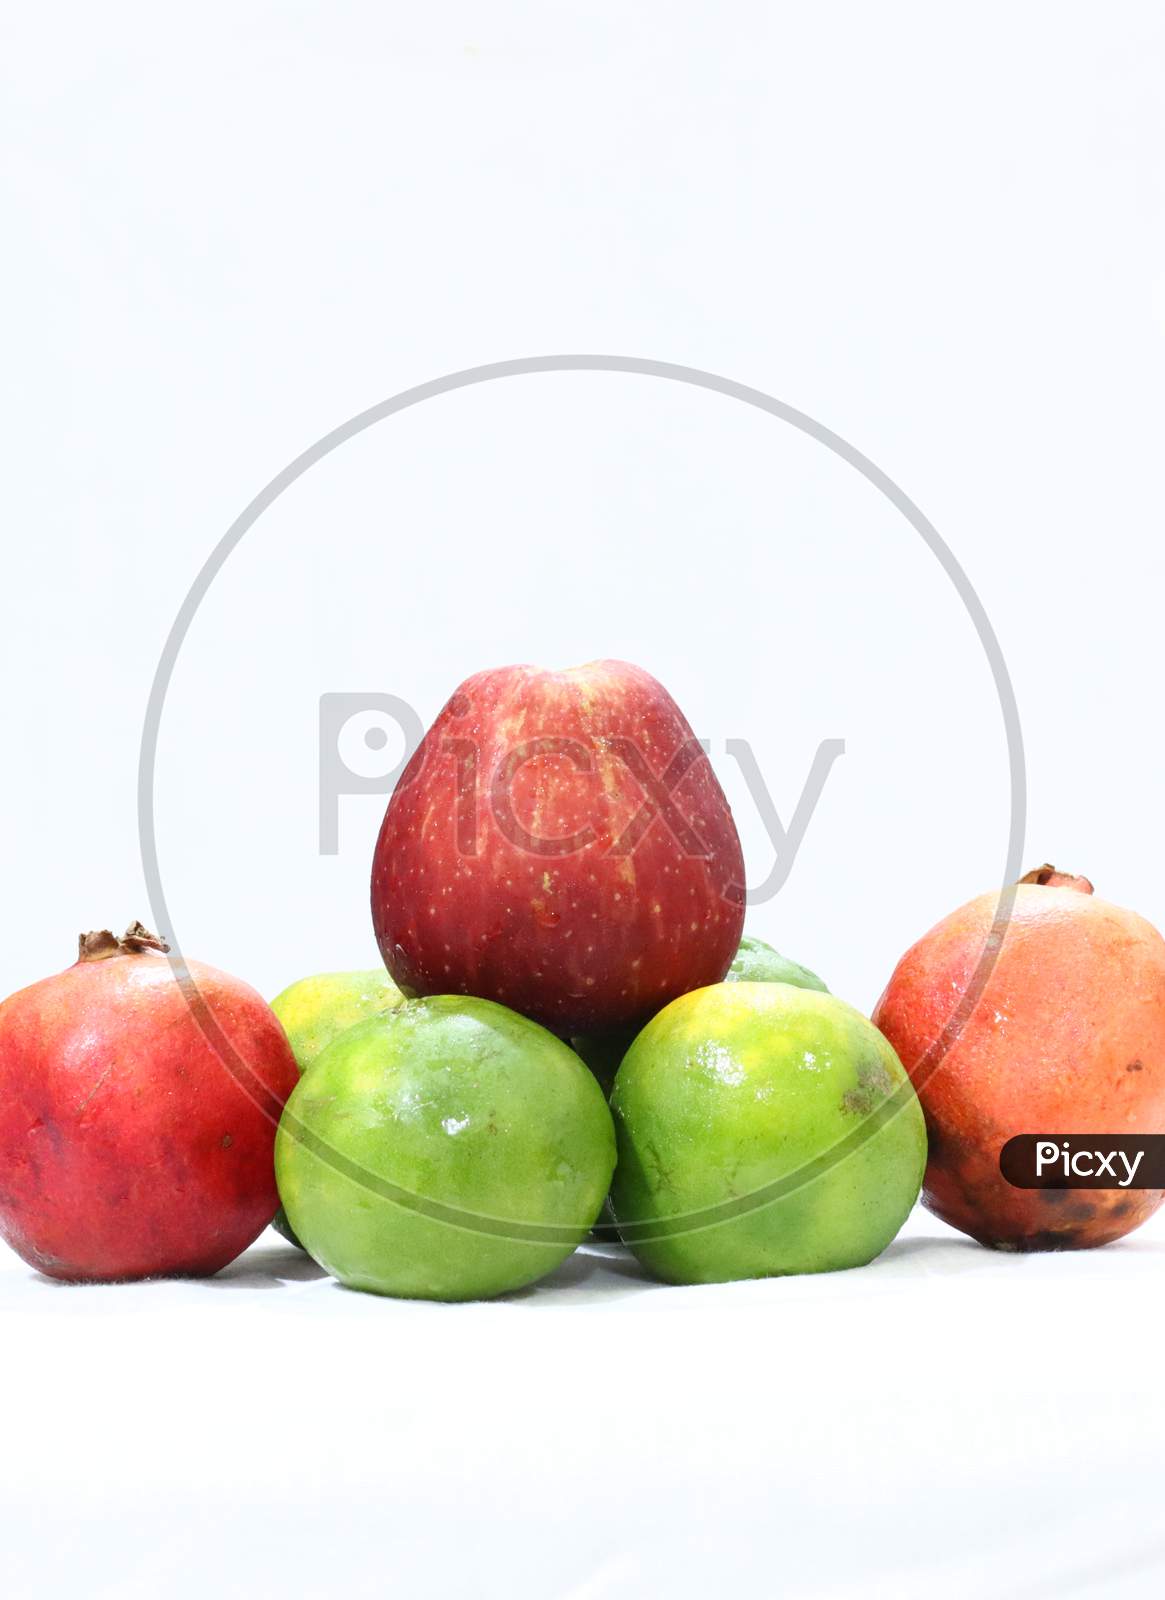 Assortment Of Healthy Fruits